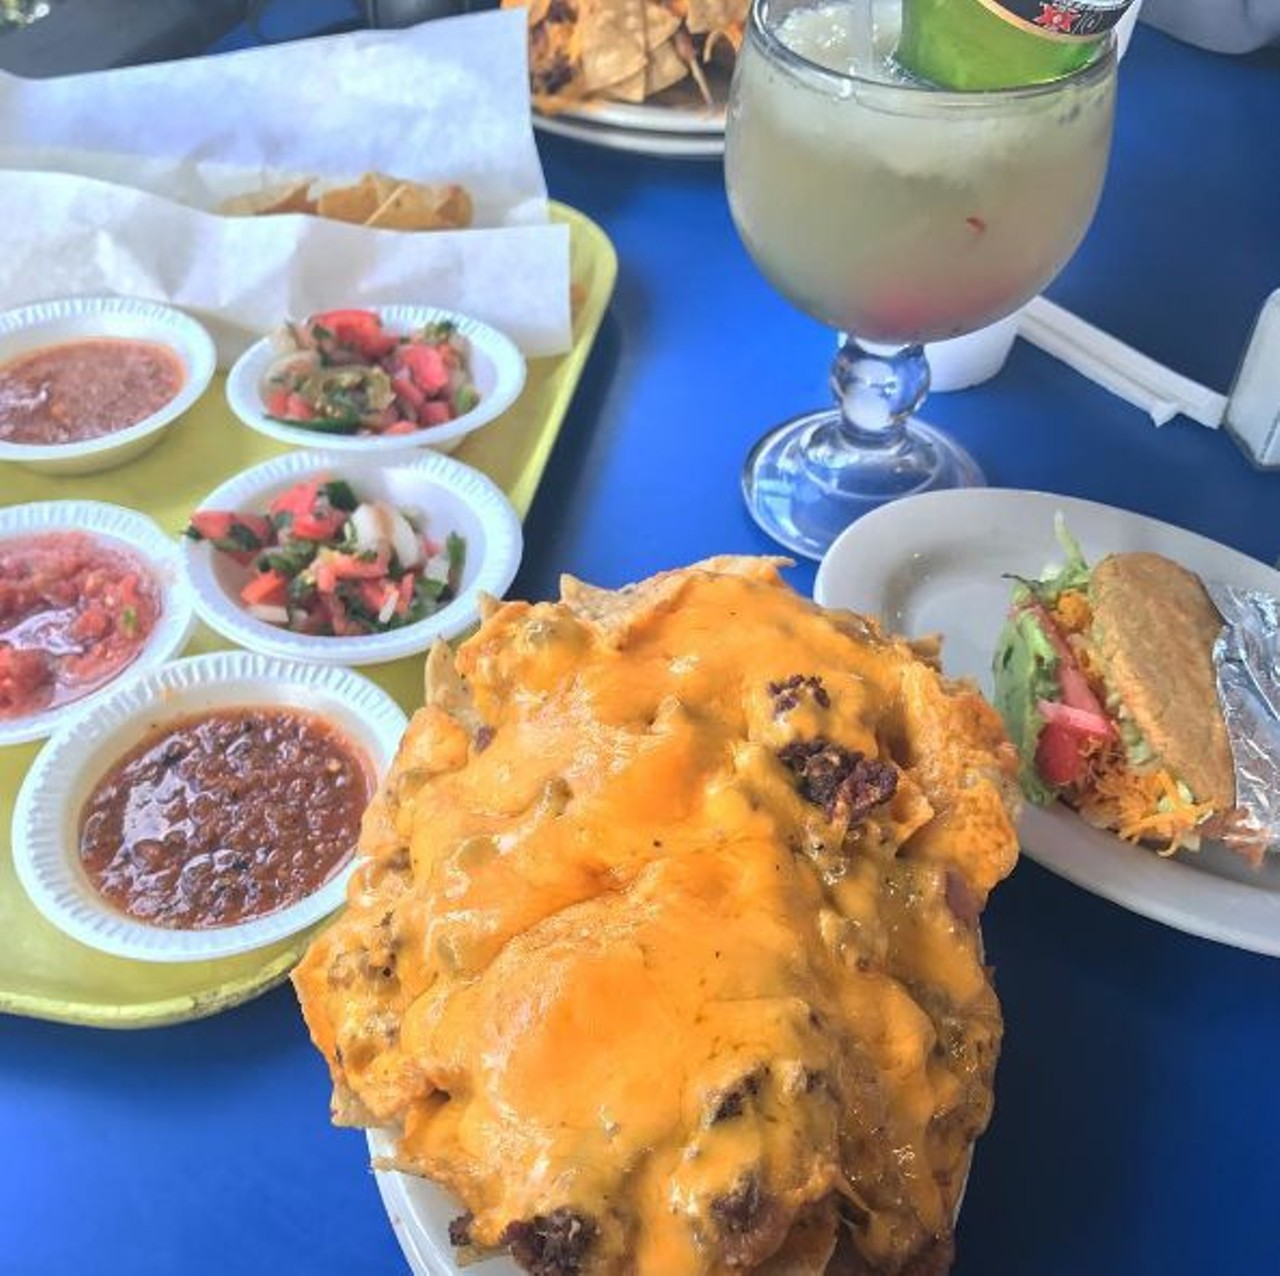 Chacho's
Multiple locations, chachos.com
Their insane nachos never disappoint. Day or night, Chacho's comes through 24/7.
Photo via Instagram, toofat2care